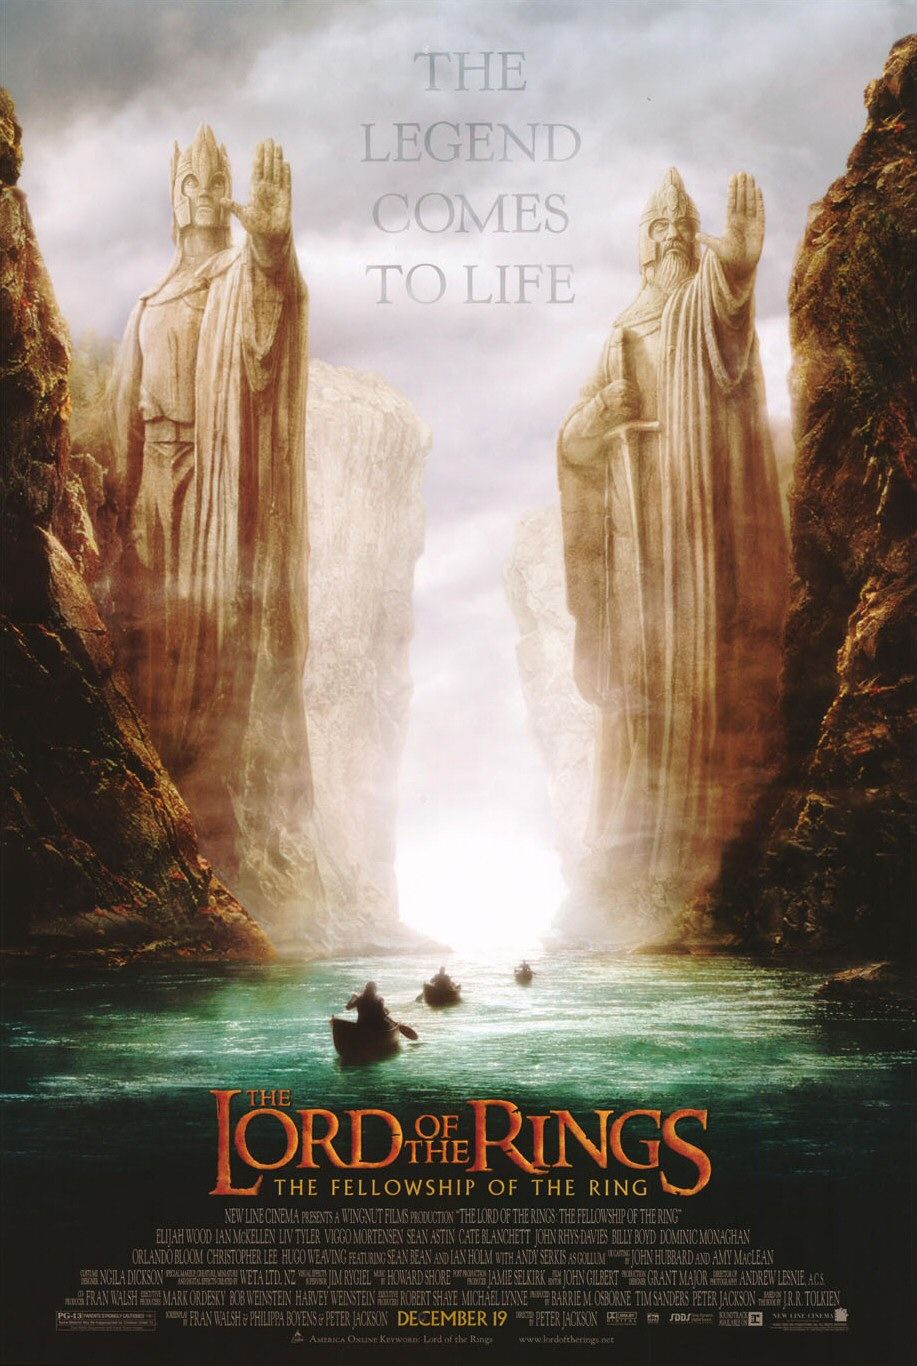 The Lord Of The Rings: The Fellowship Of The Ring Extended Edition